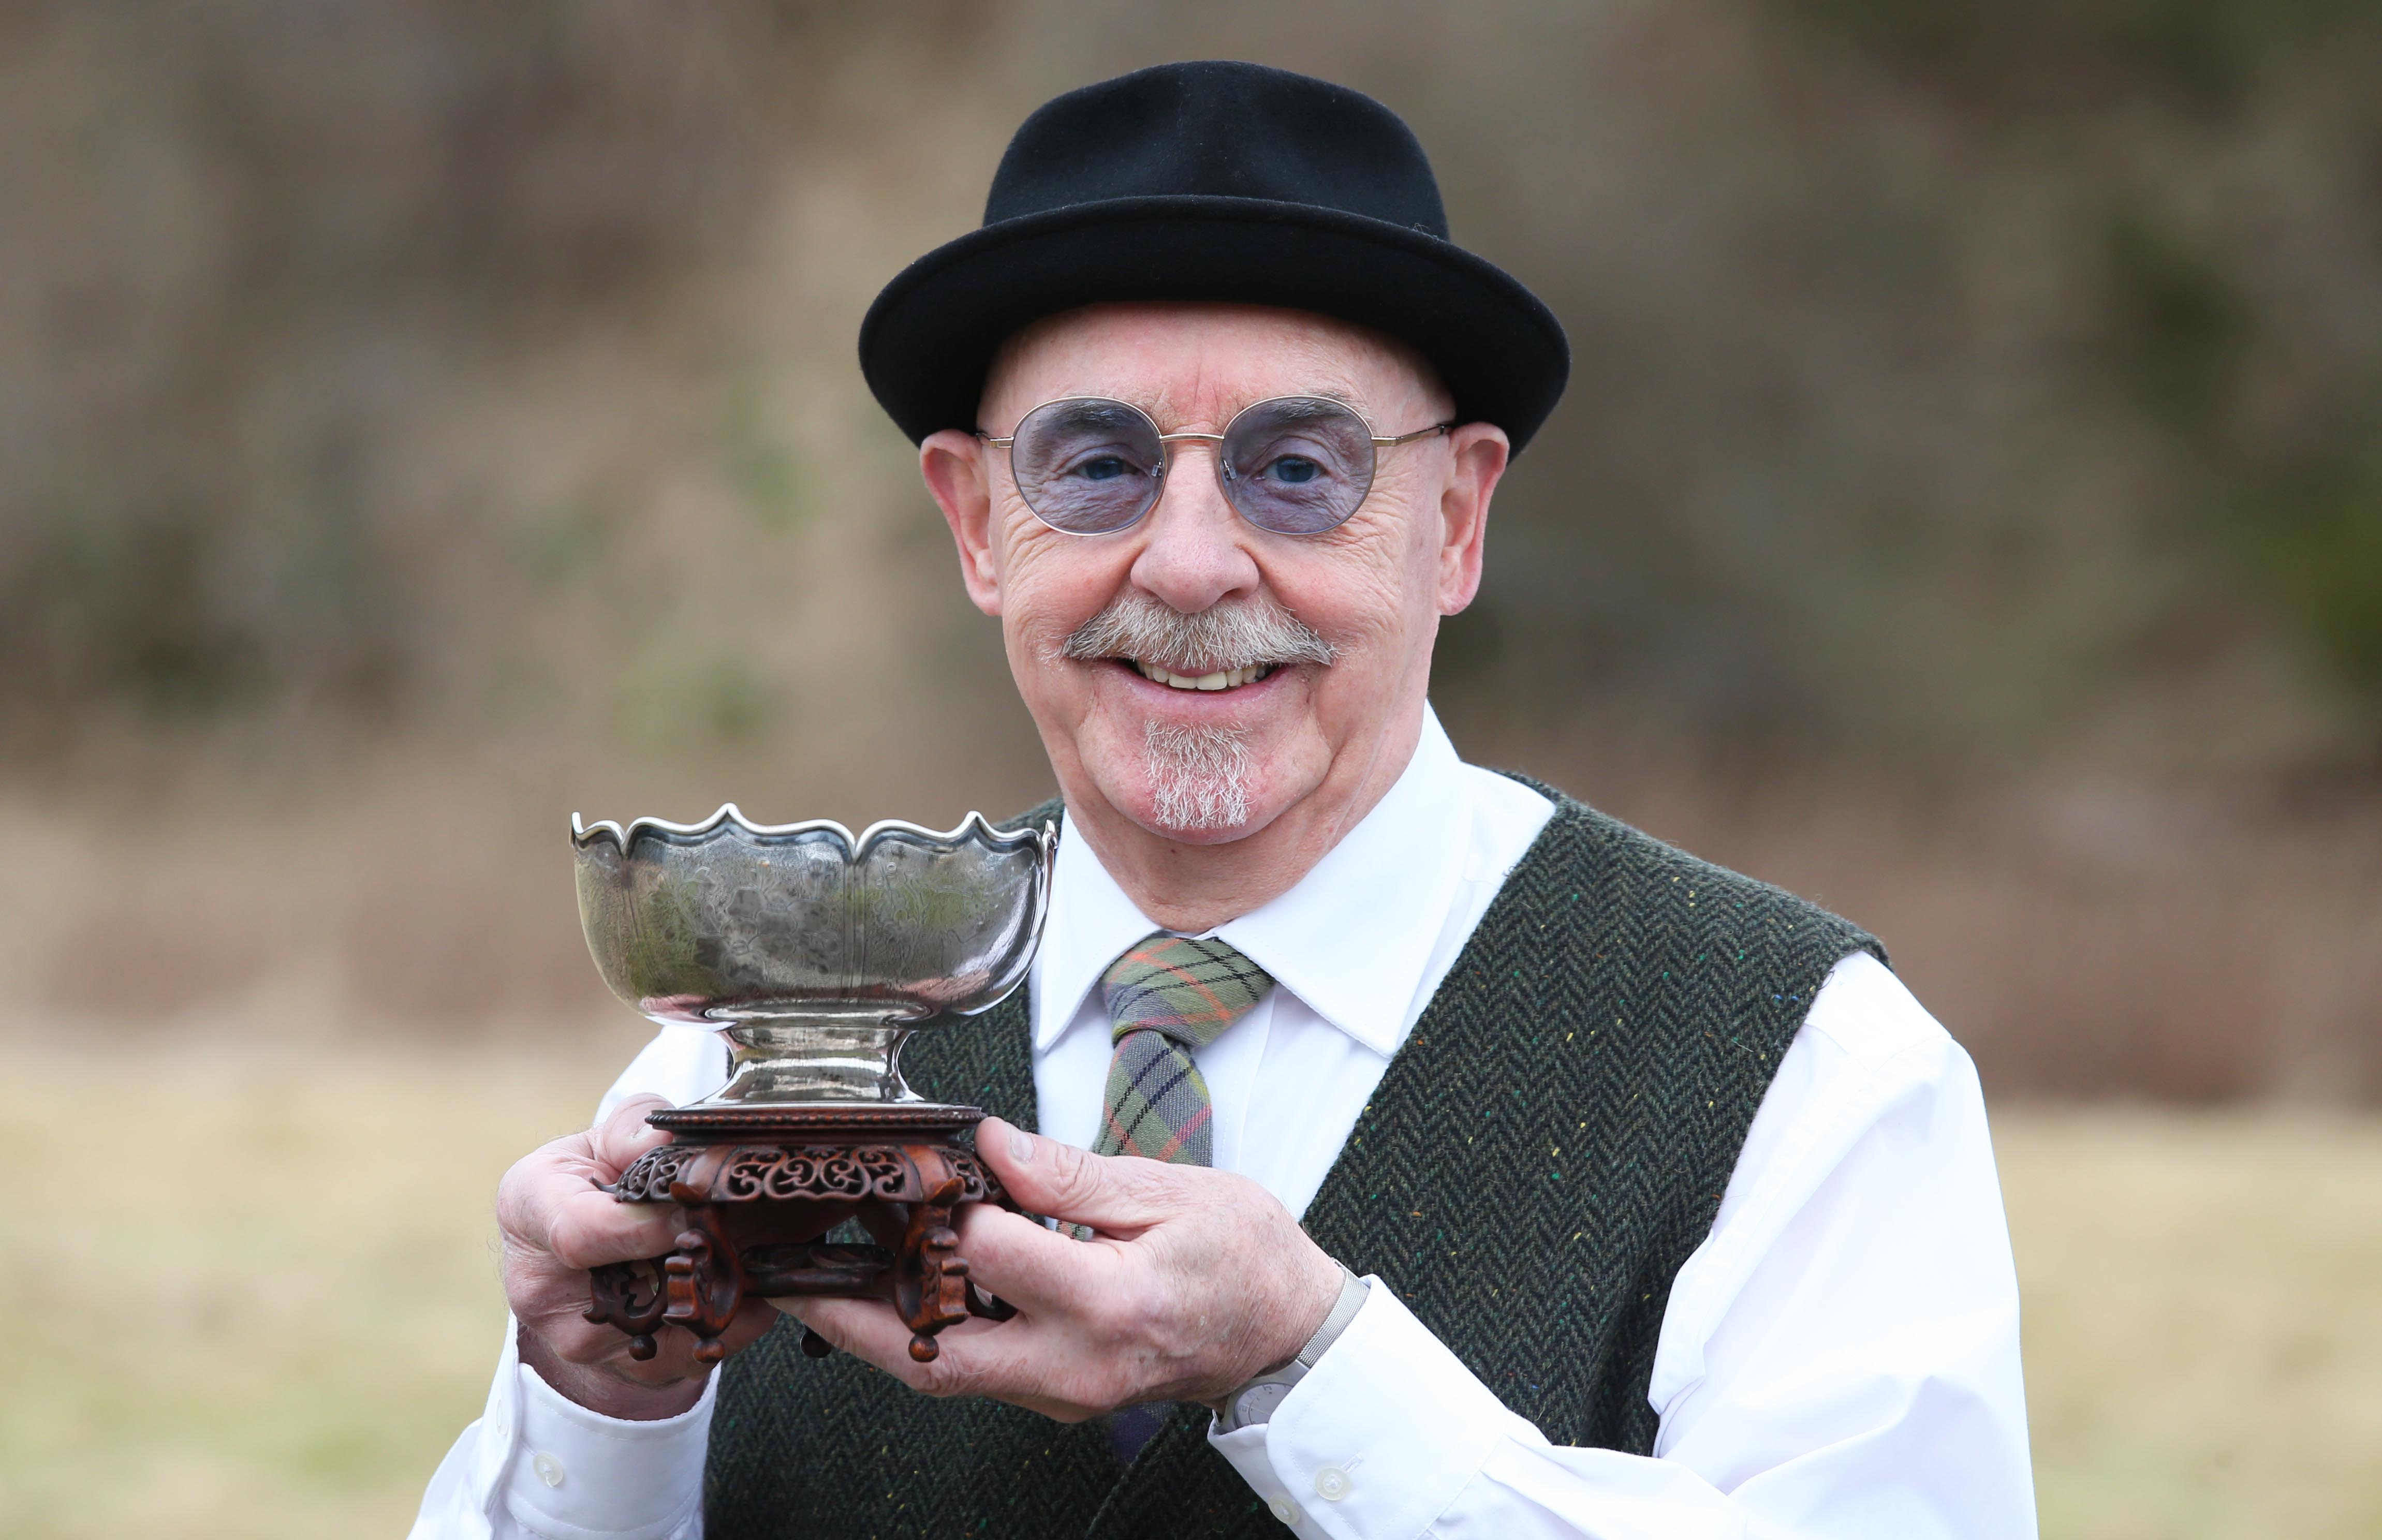 Adrian Taylor with the Cabrach Picnic and Games Rose Bowl. All pictures credit Peter Jolly.